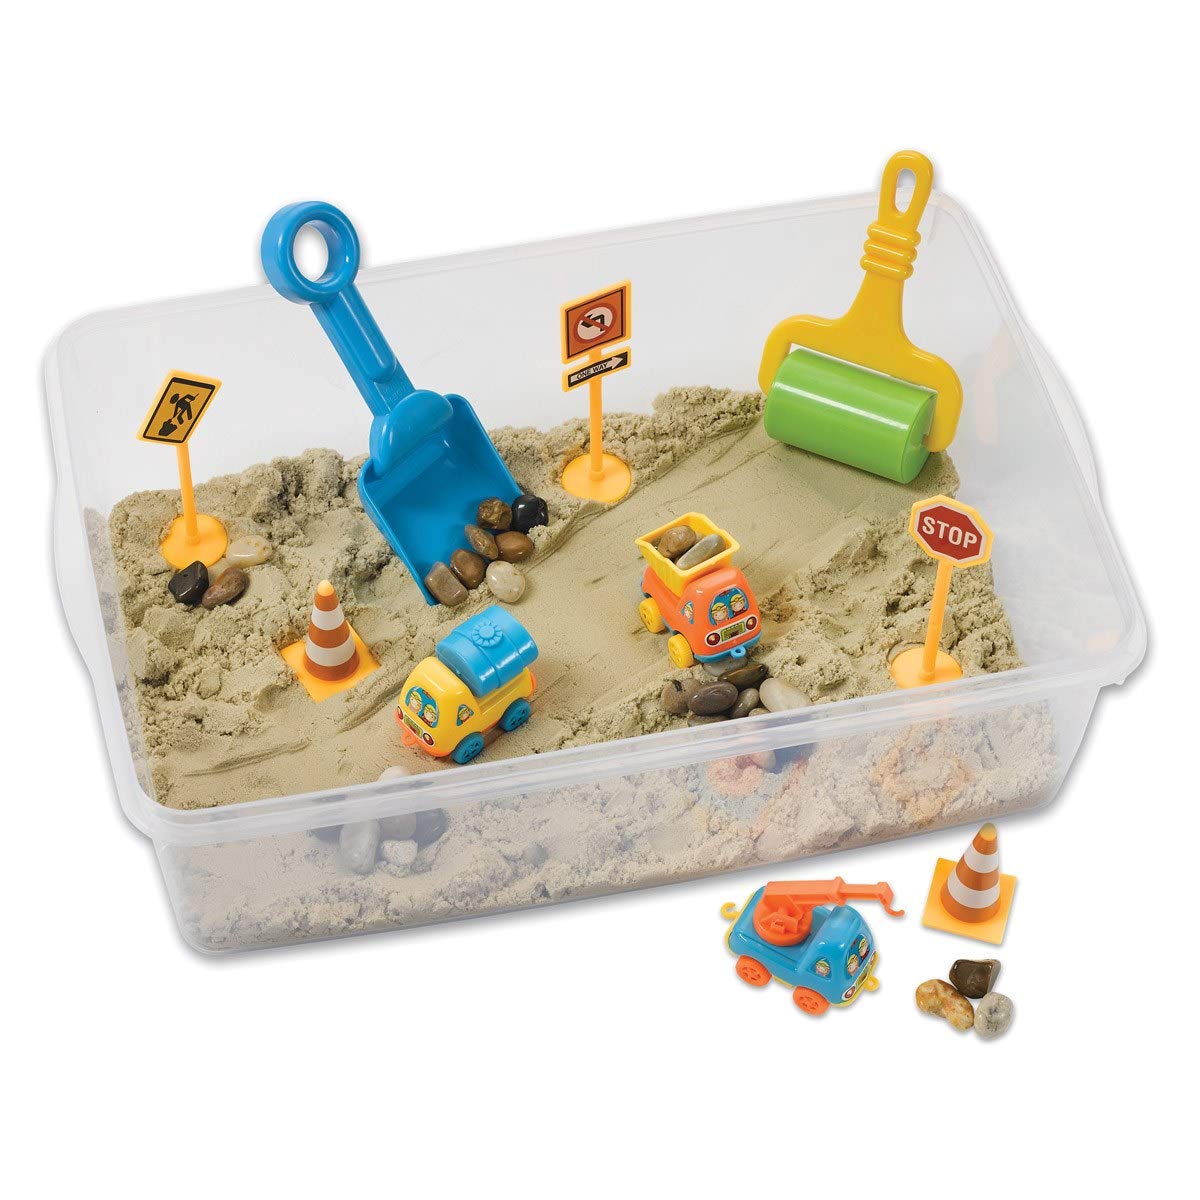 Kids Sensory Playset Bin Construction Zone $14.18 & More + Free Shipping w/ Prime or on $25+